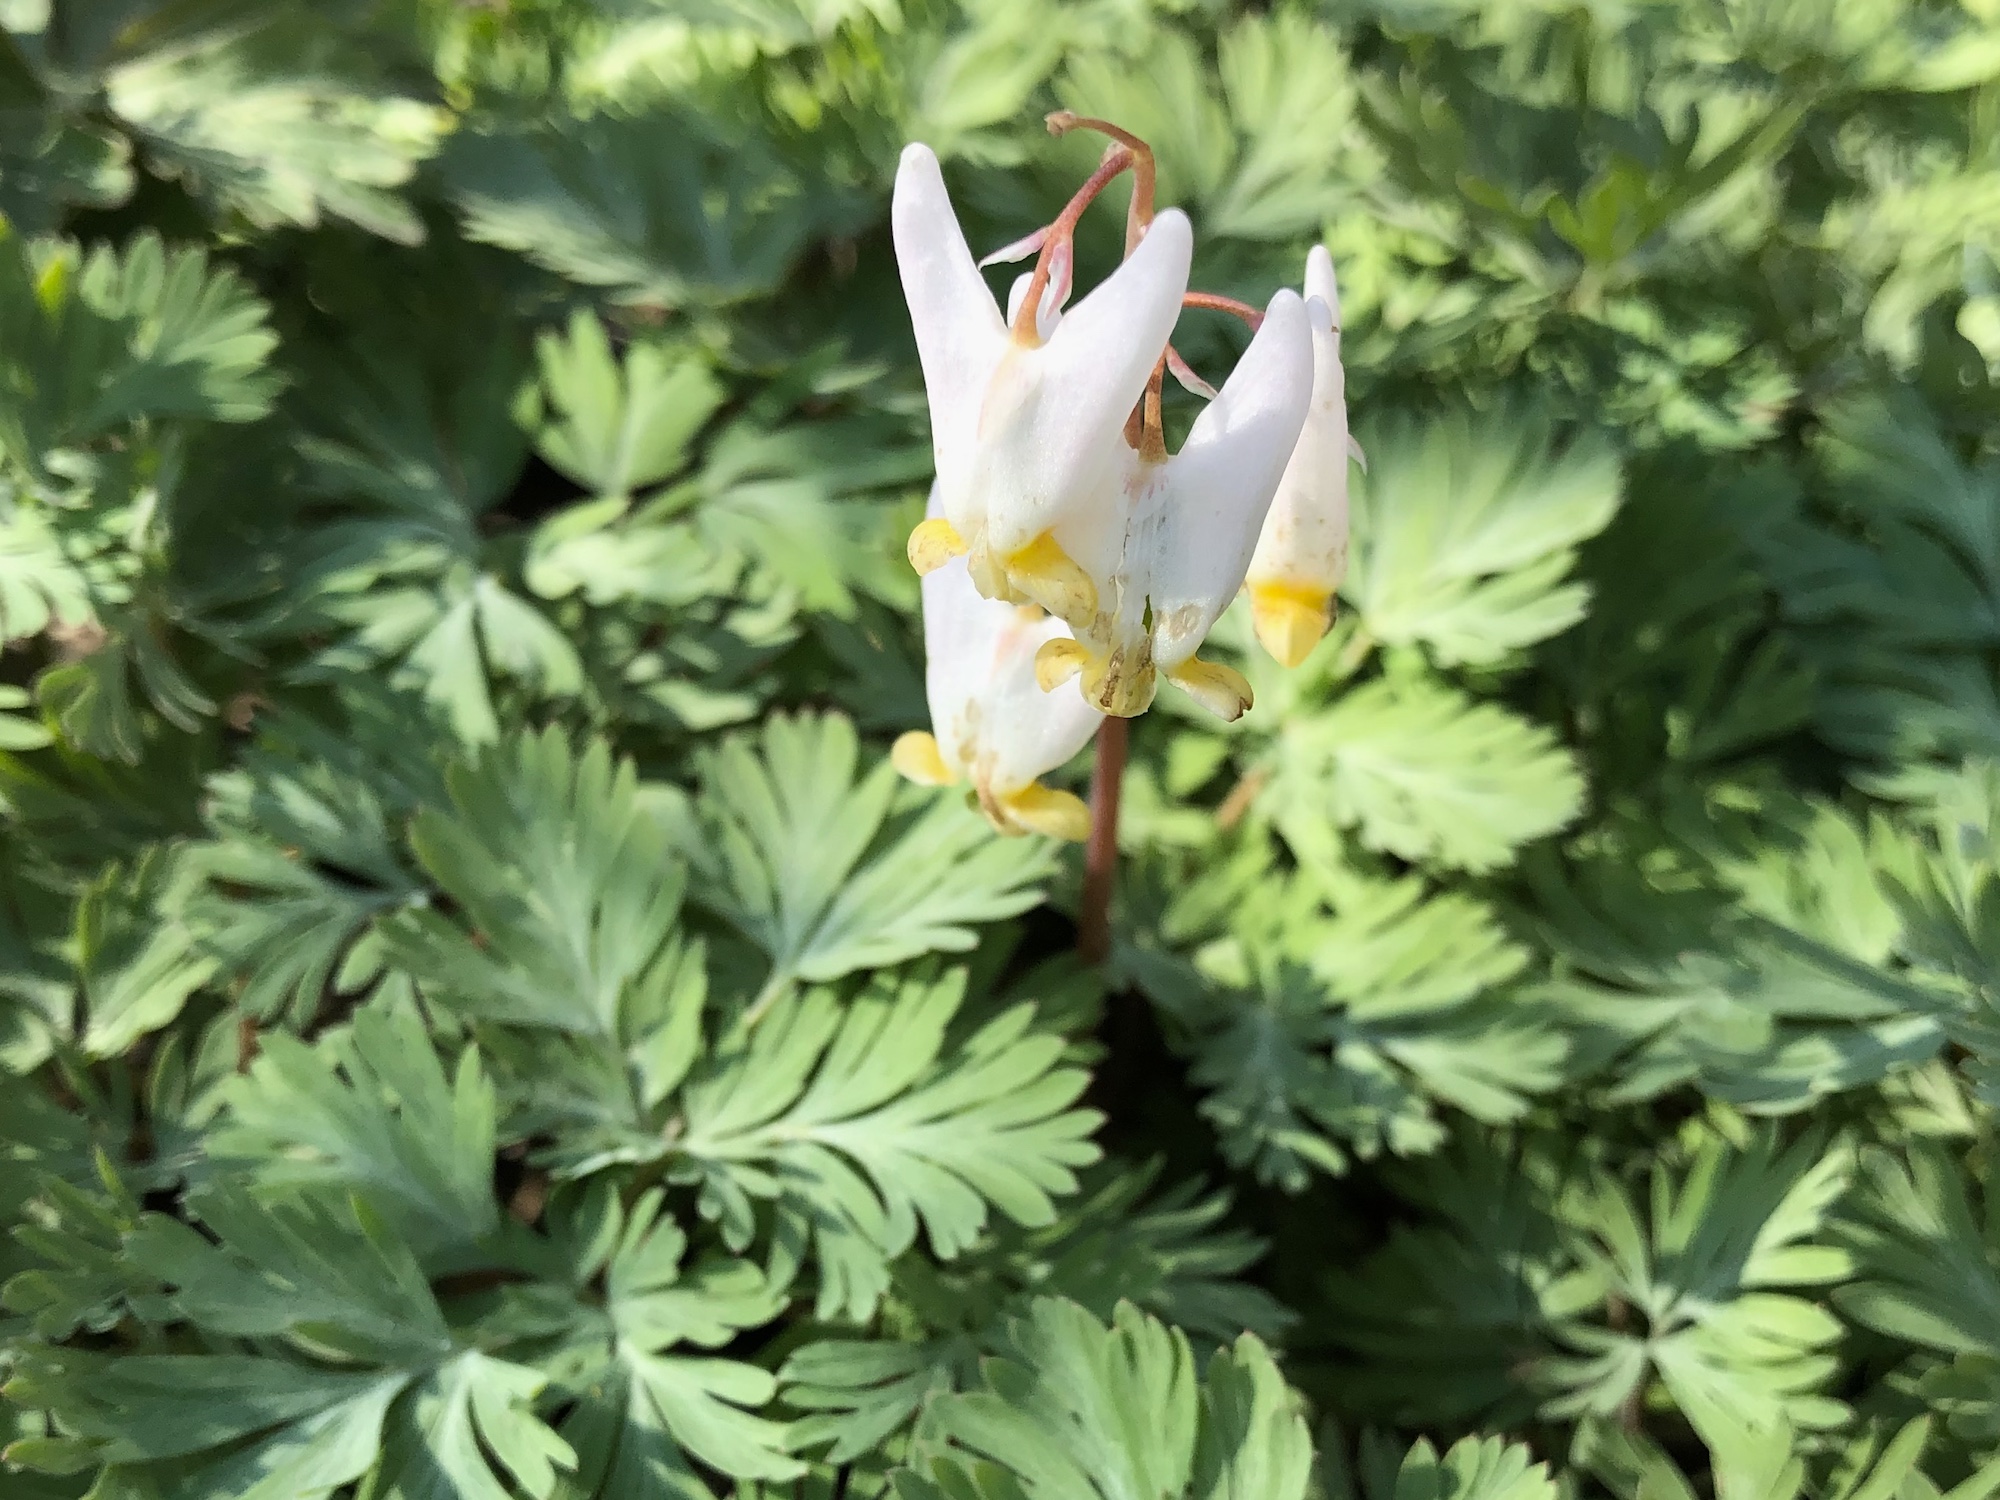 Dutchman's Breeches by Duck Pond on April 22, 2020.